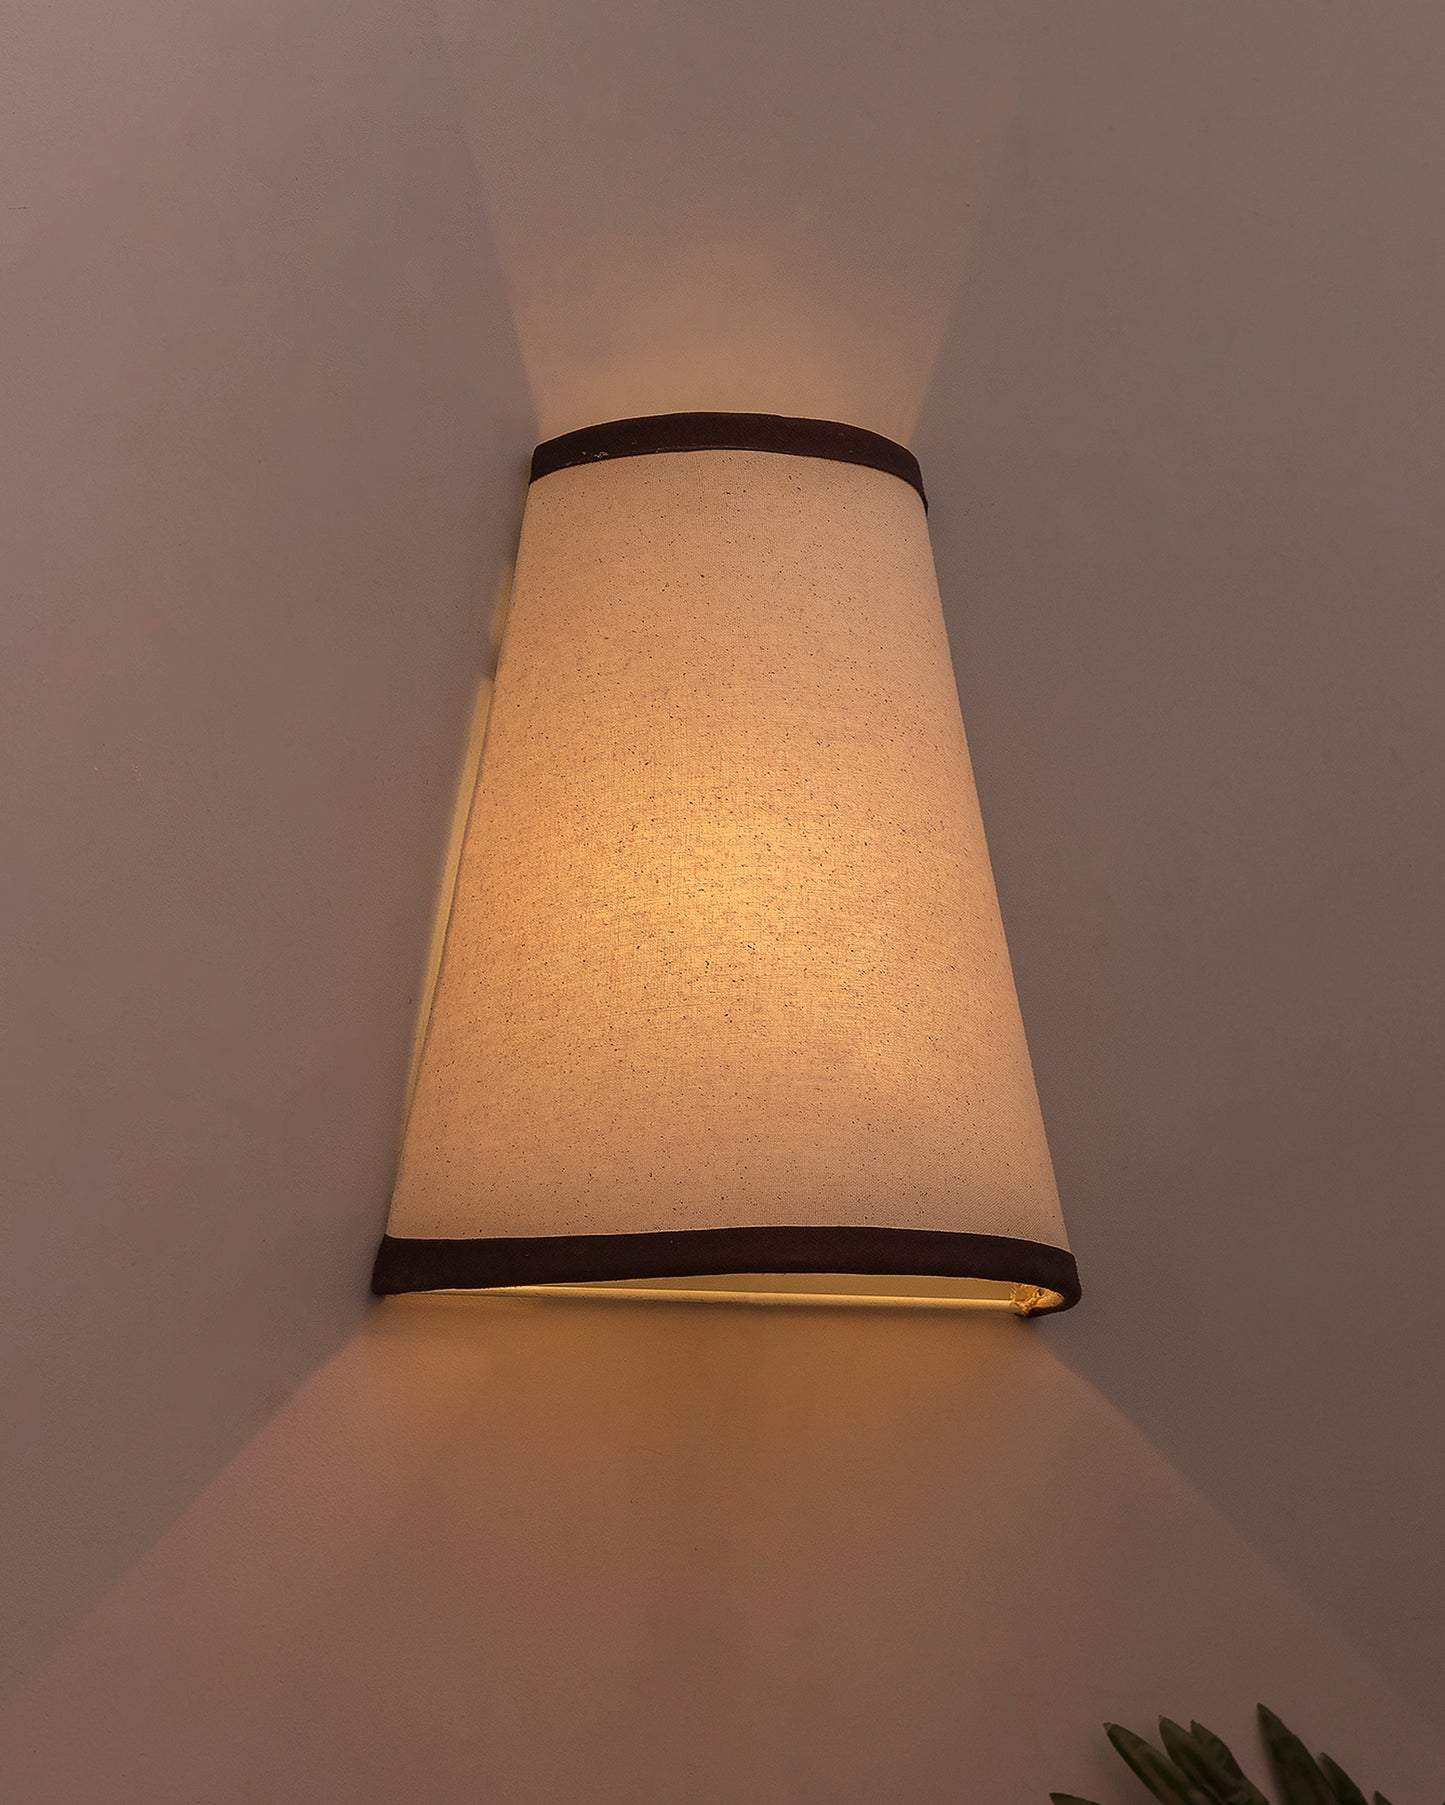 Wall Mounted Sconce Shade Lamp, Door Light E27, Khadi Fabric with Dark Brown Stripes, Cone, Modern Wall Light